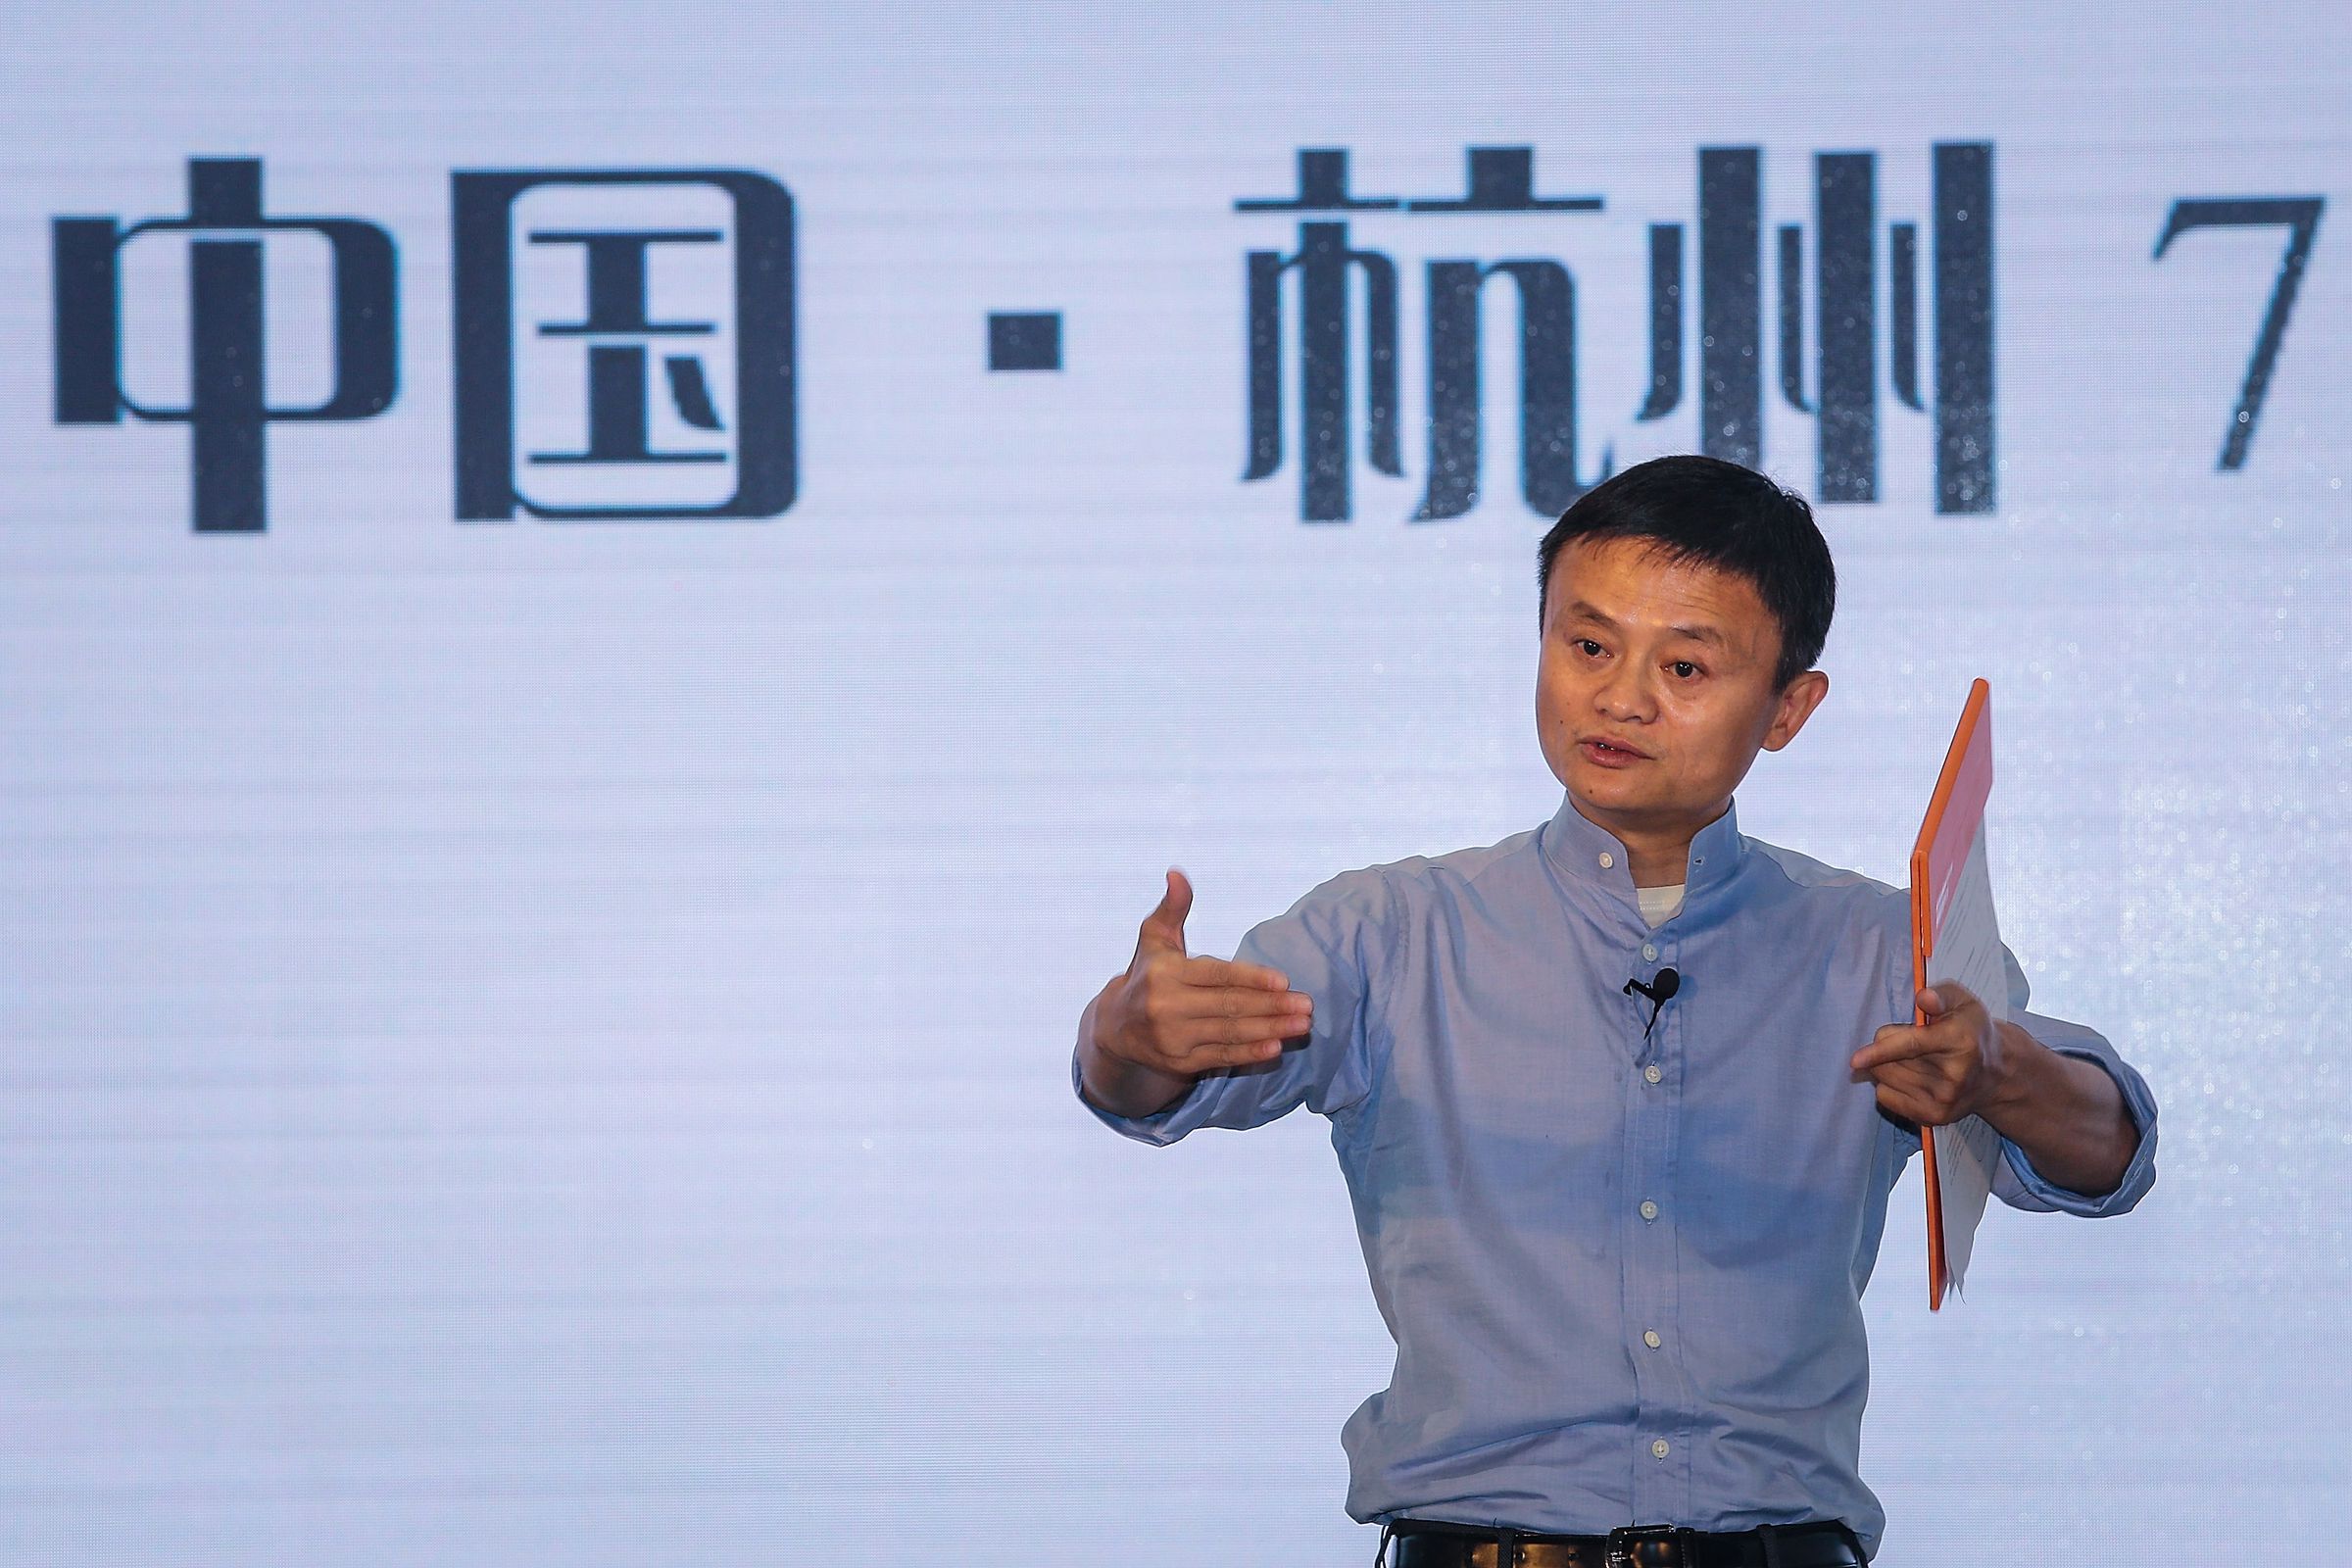 Xixi Park Of Alibaba Group Becomes The Largest Retail Trading Platform In The World